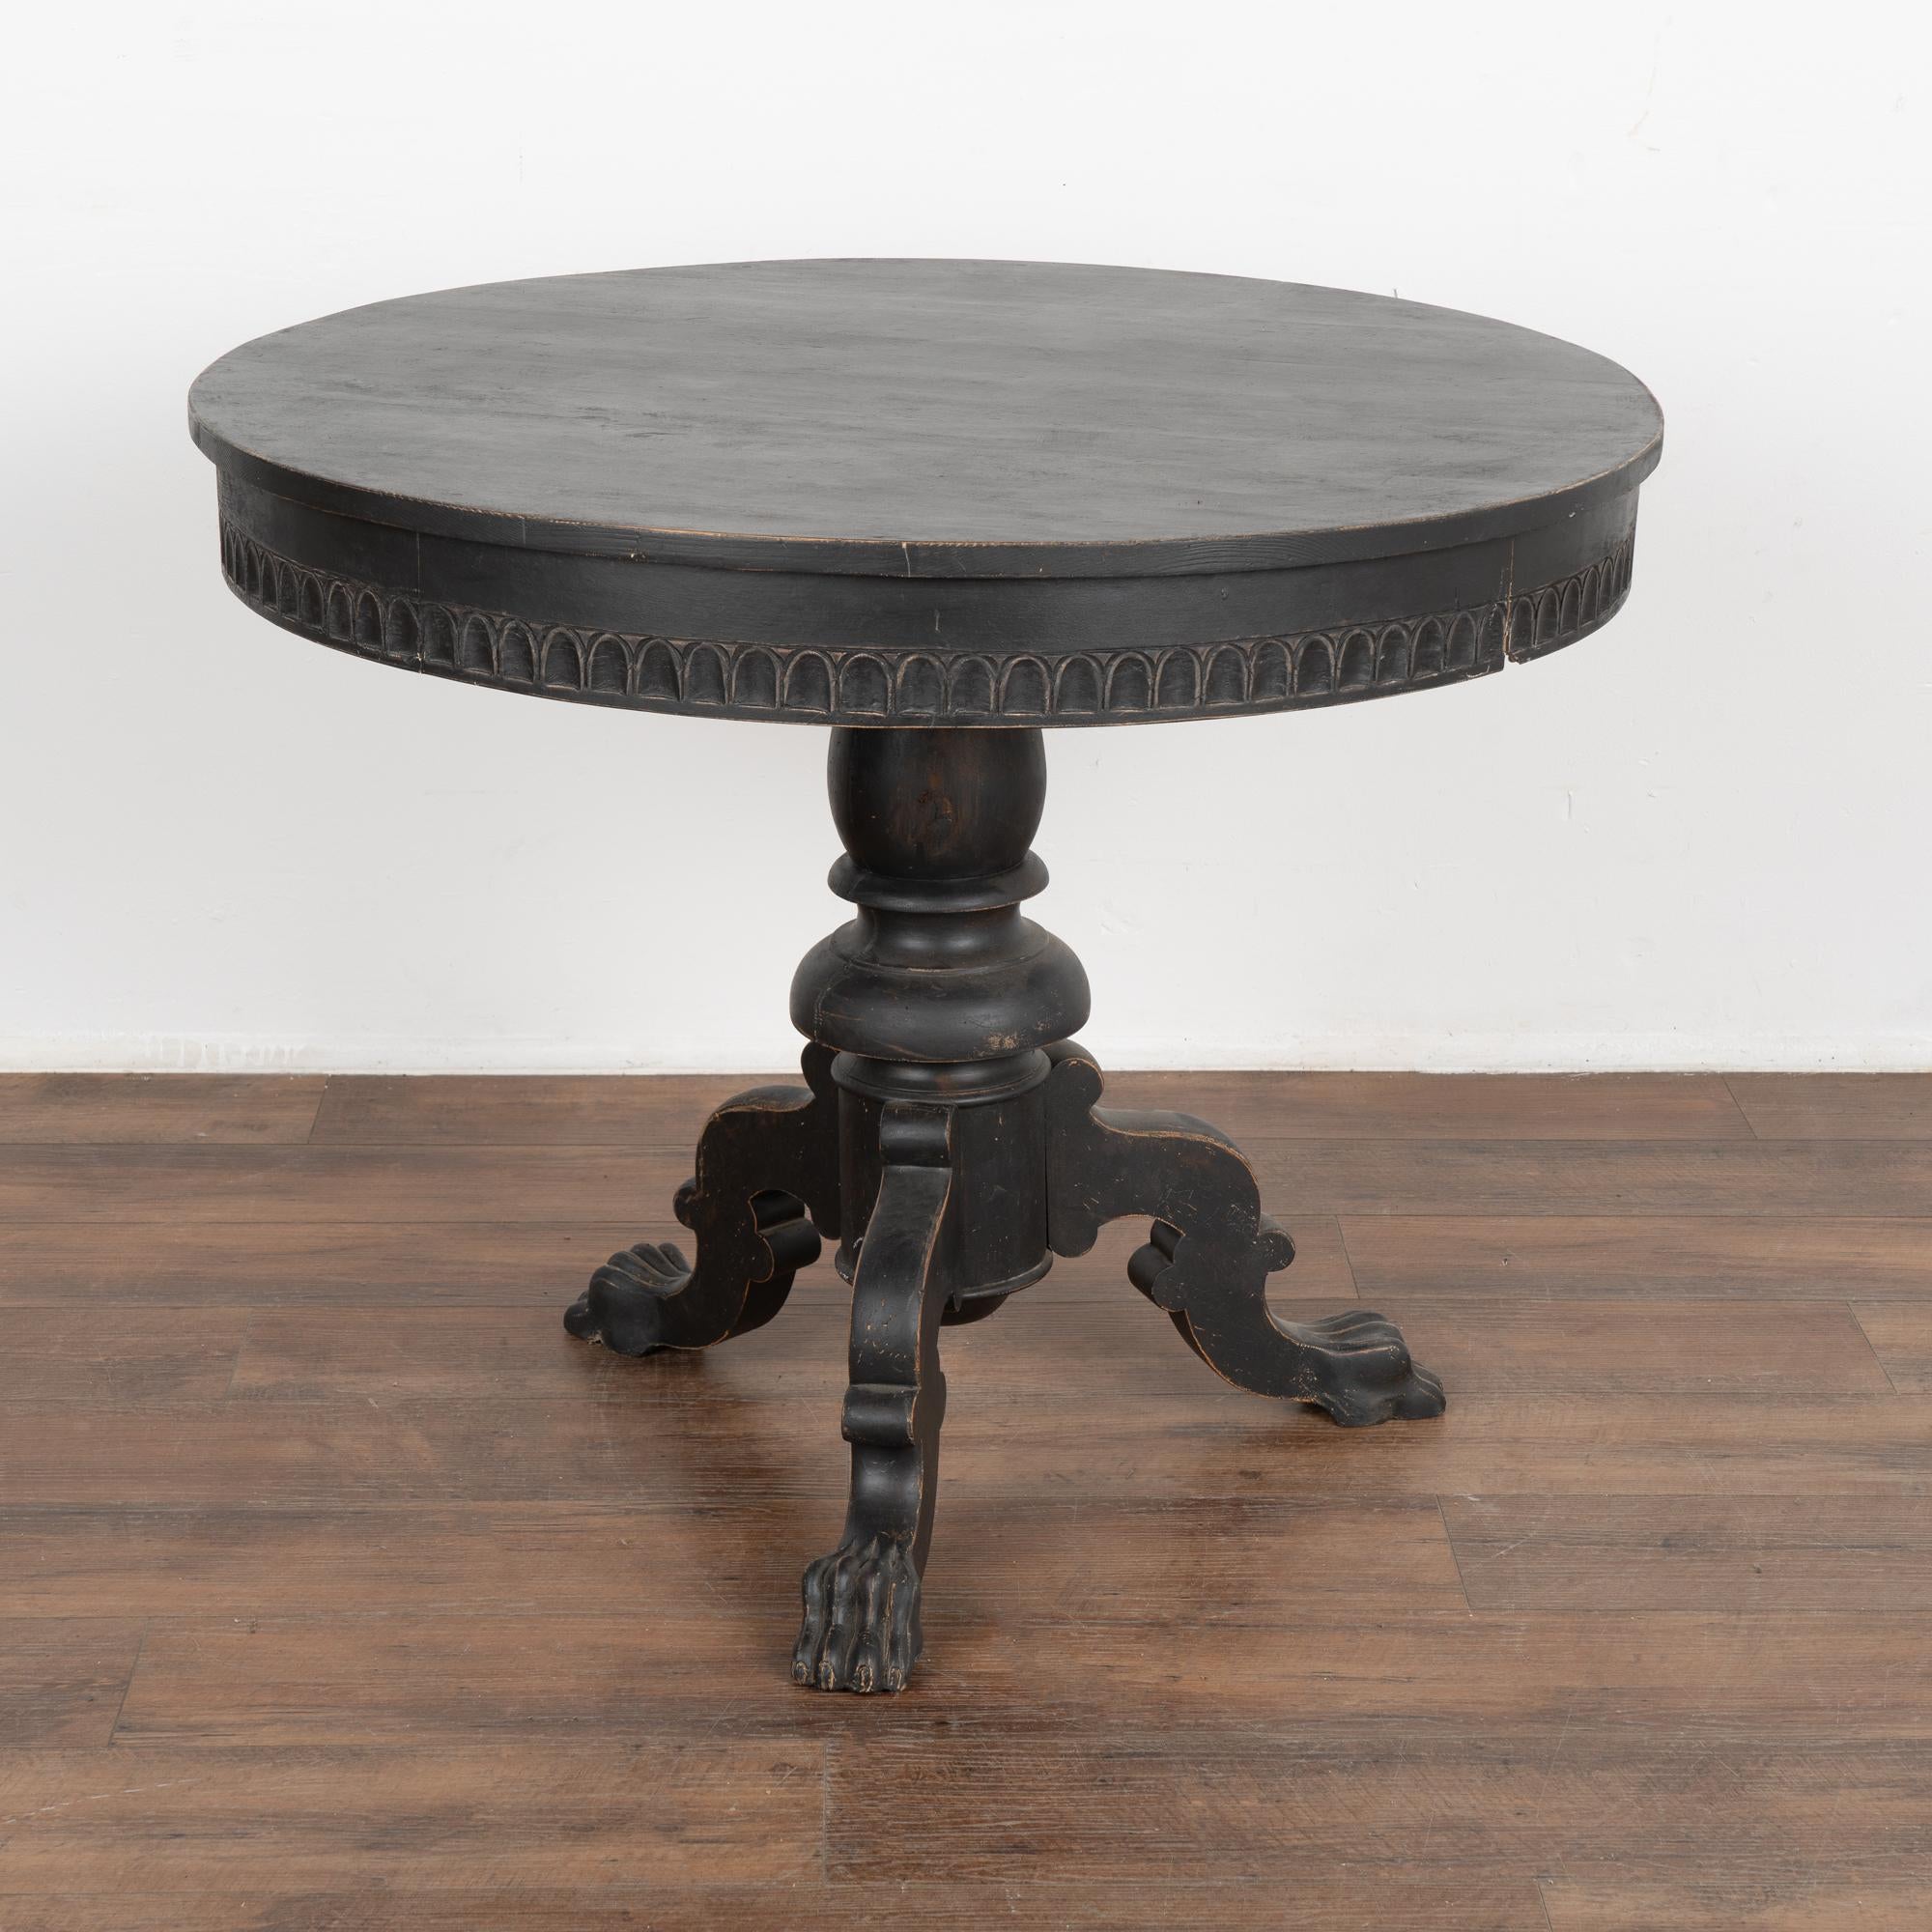 Round Black Painted Pedestal Side Table, Sweden circa 1890 For Sale 2